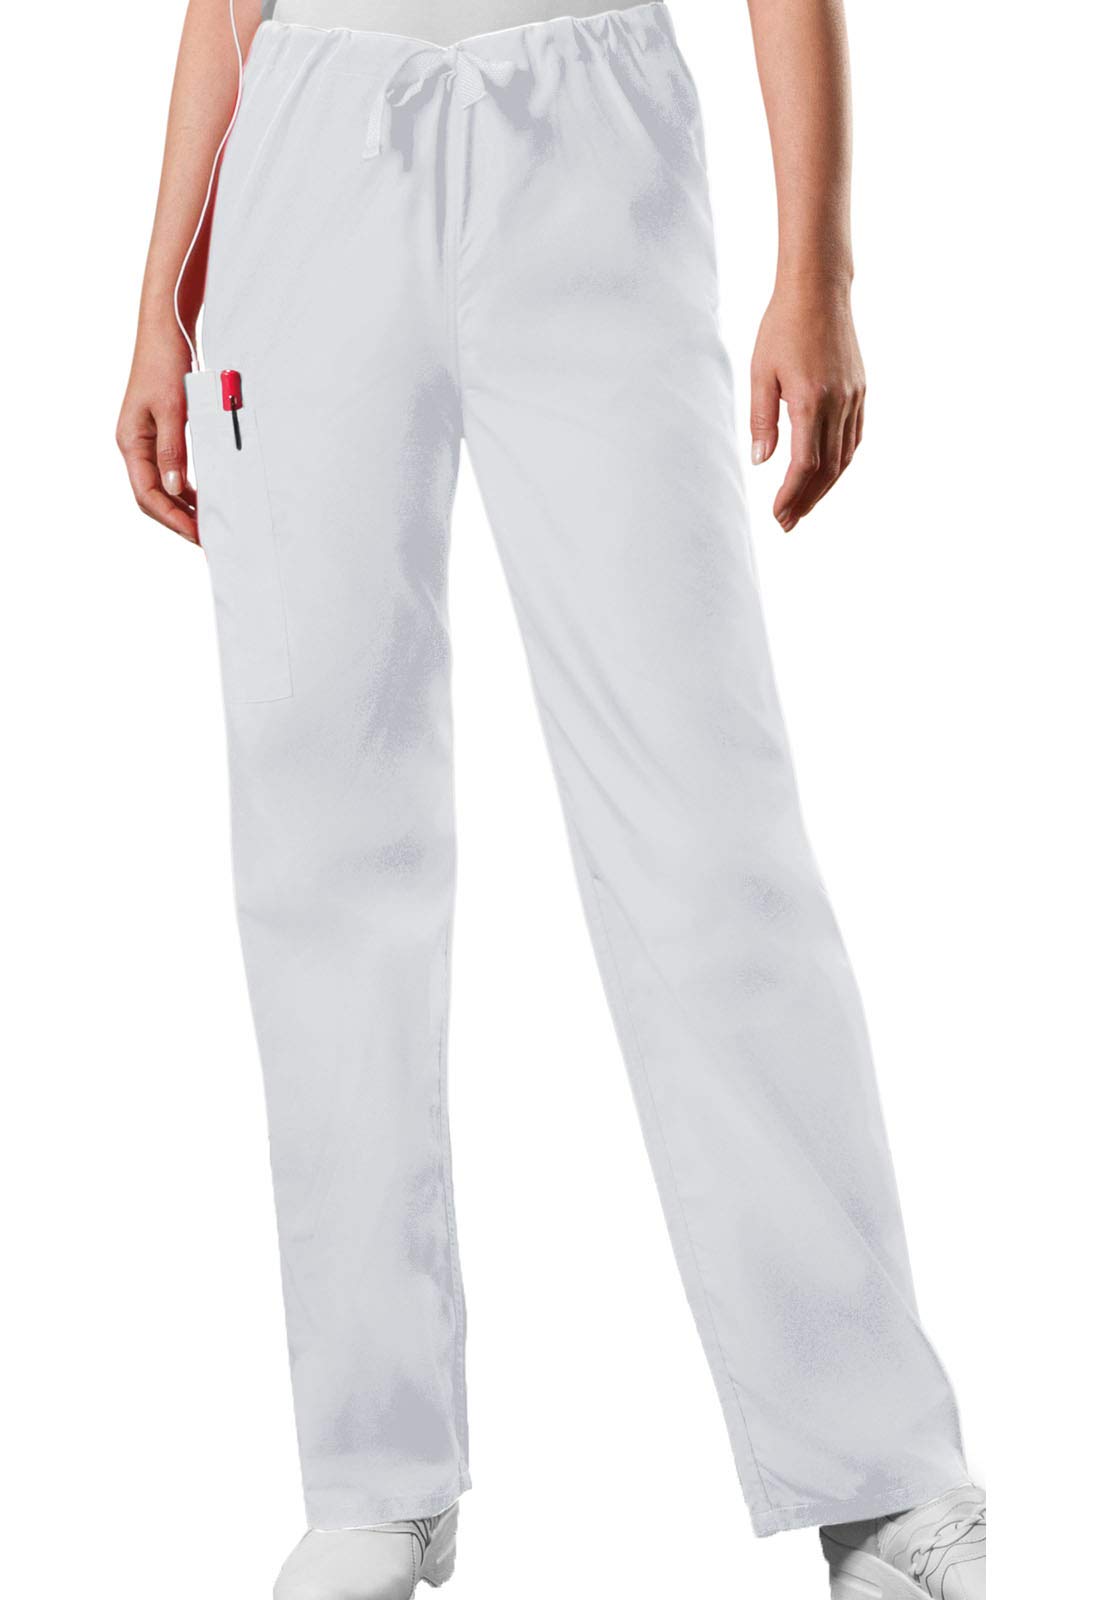 Cherokee Cargo Pant for Men and Women with Zip Fly Front and Adjustable Webbed Drawstring 4100